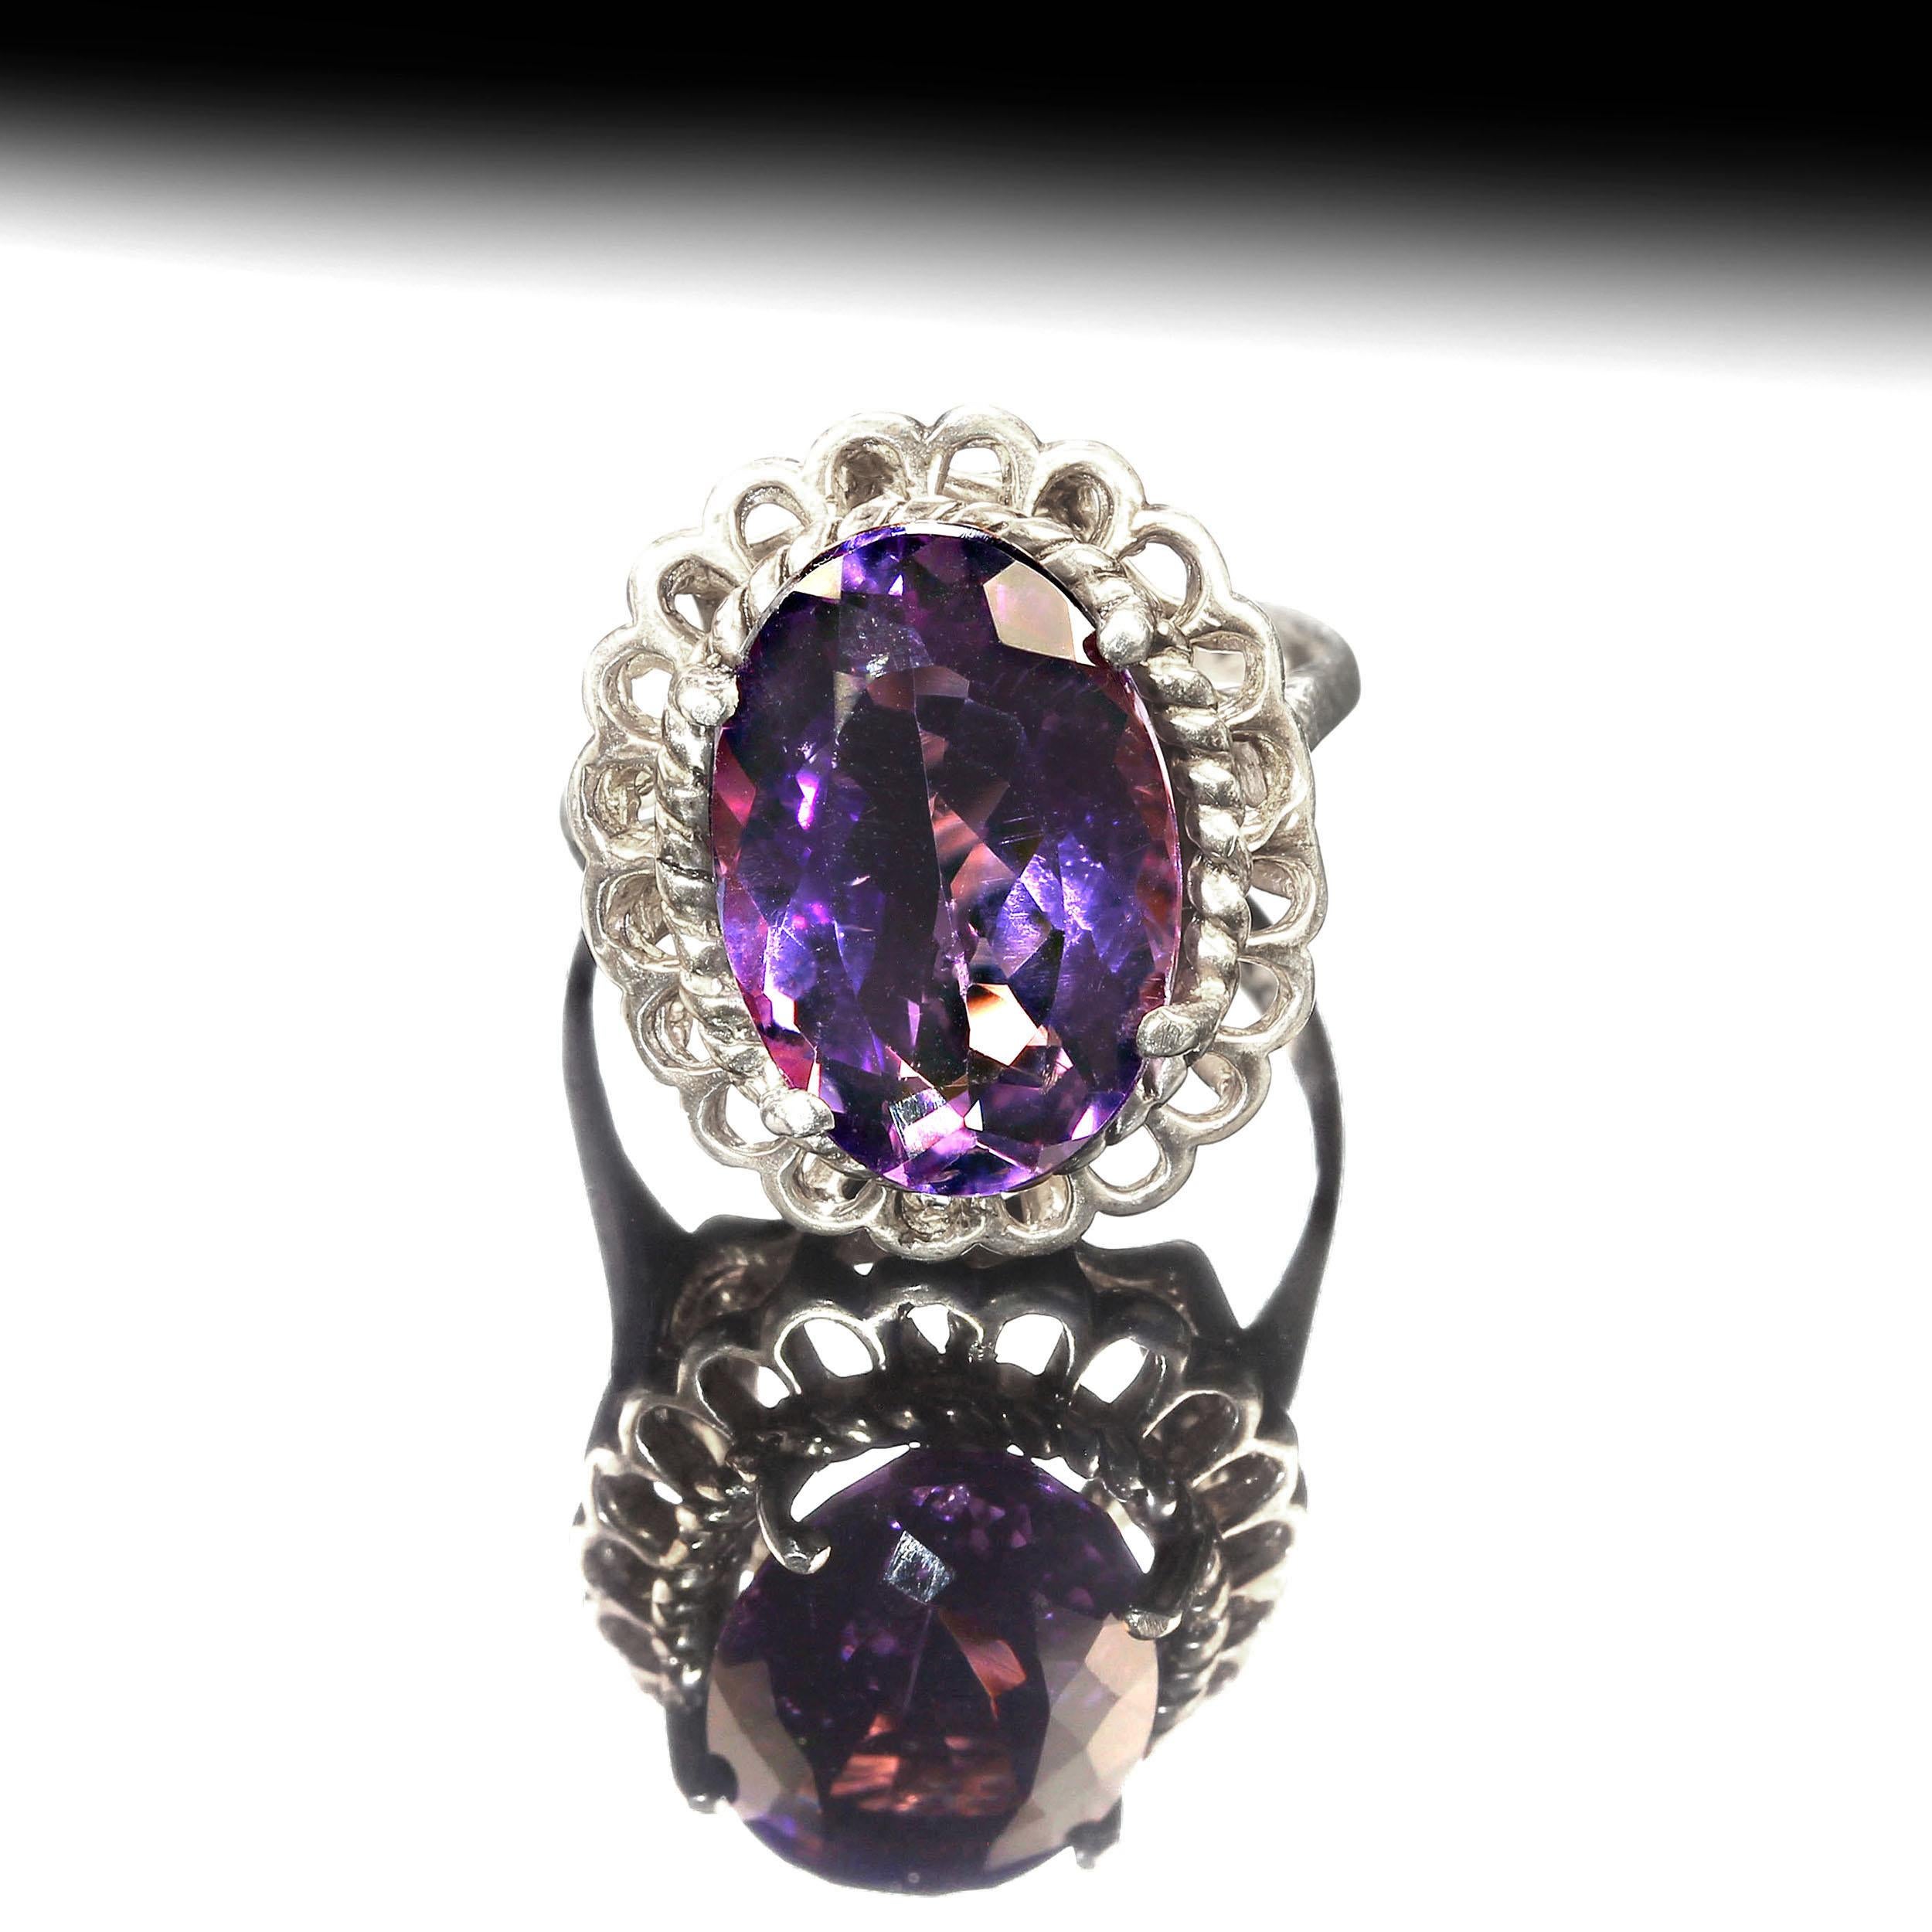 Custom made, sparkling oval Amethyst Ring. This lively Amethyst has delightful pink flashes and is set in a lovely detailed high basket setting of Rhodium over Sterling Silver Ring. This setting has a twisted rope detail next to the amethyst and the